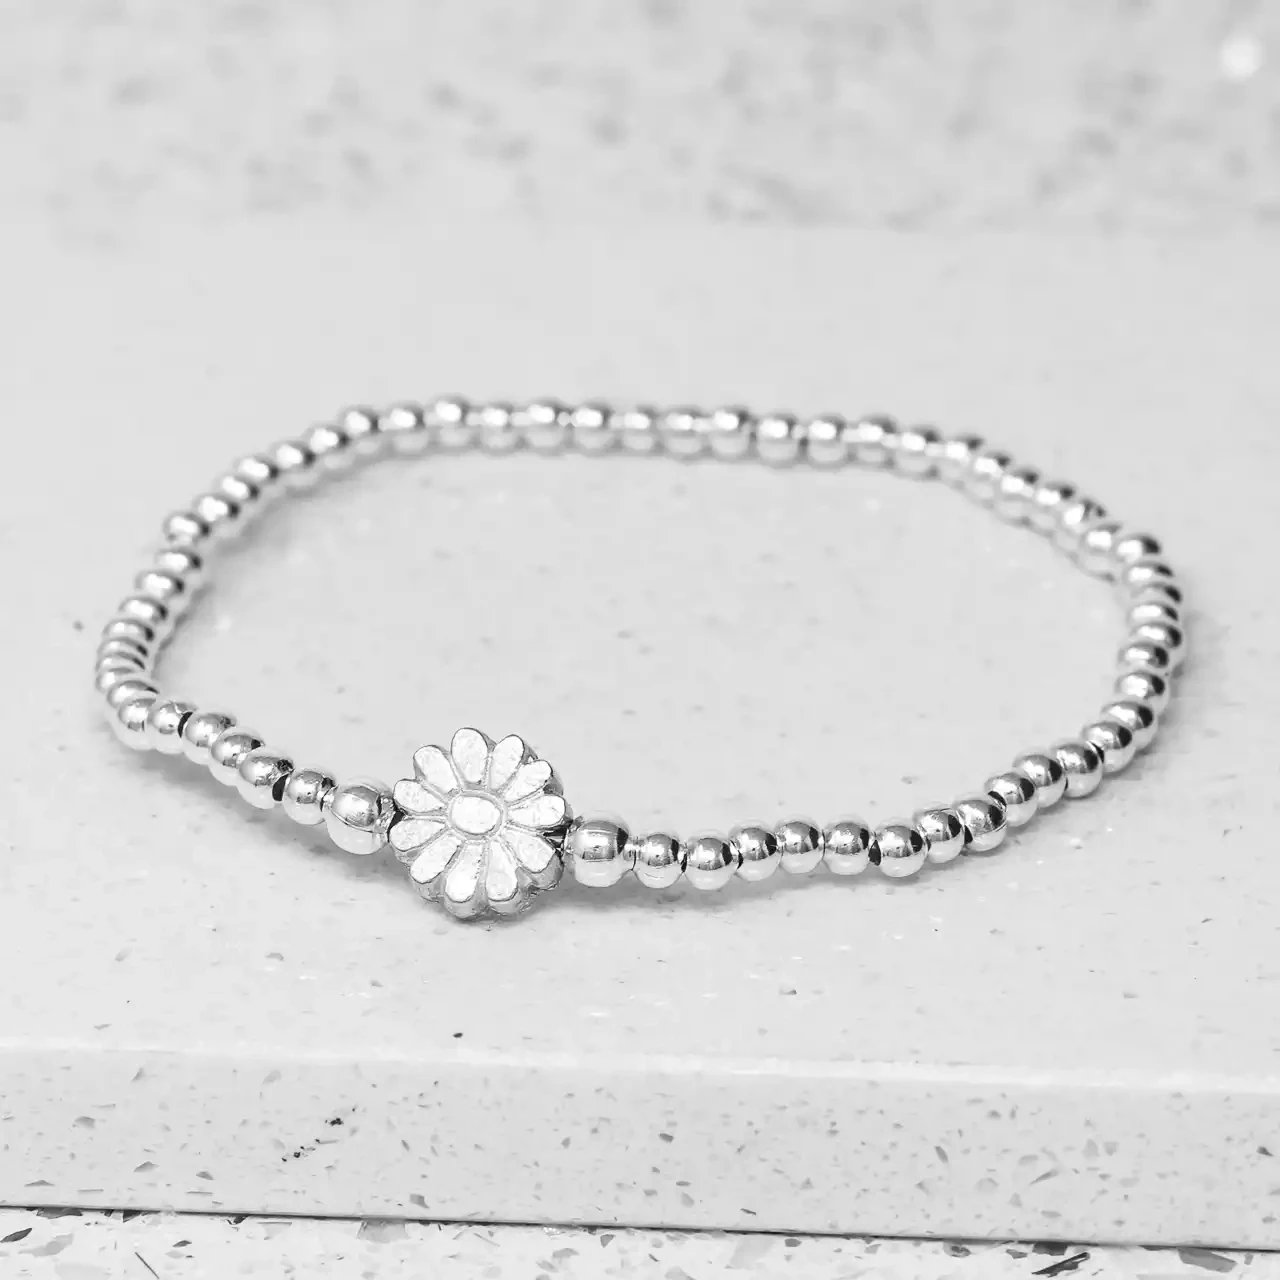 Seed Bead Bracelet With Pewter Daisy Charm - Friends for Life by Metal Planet